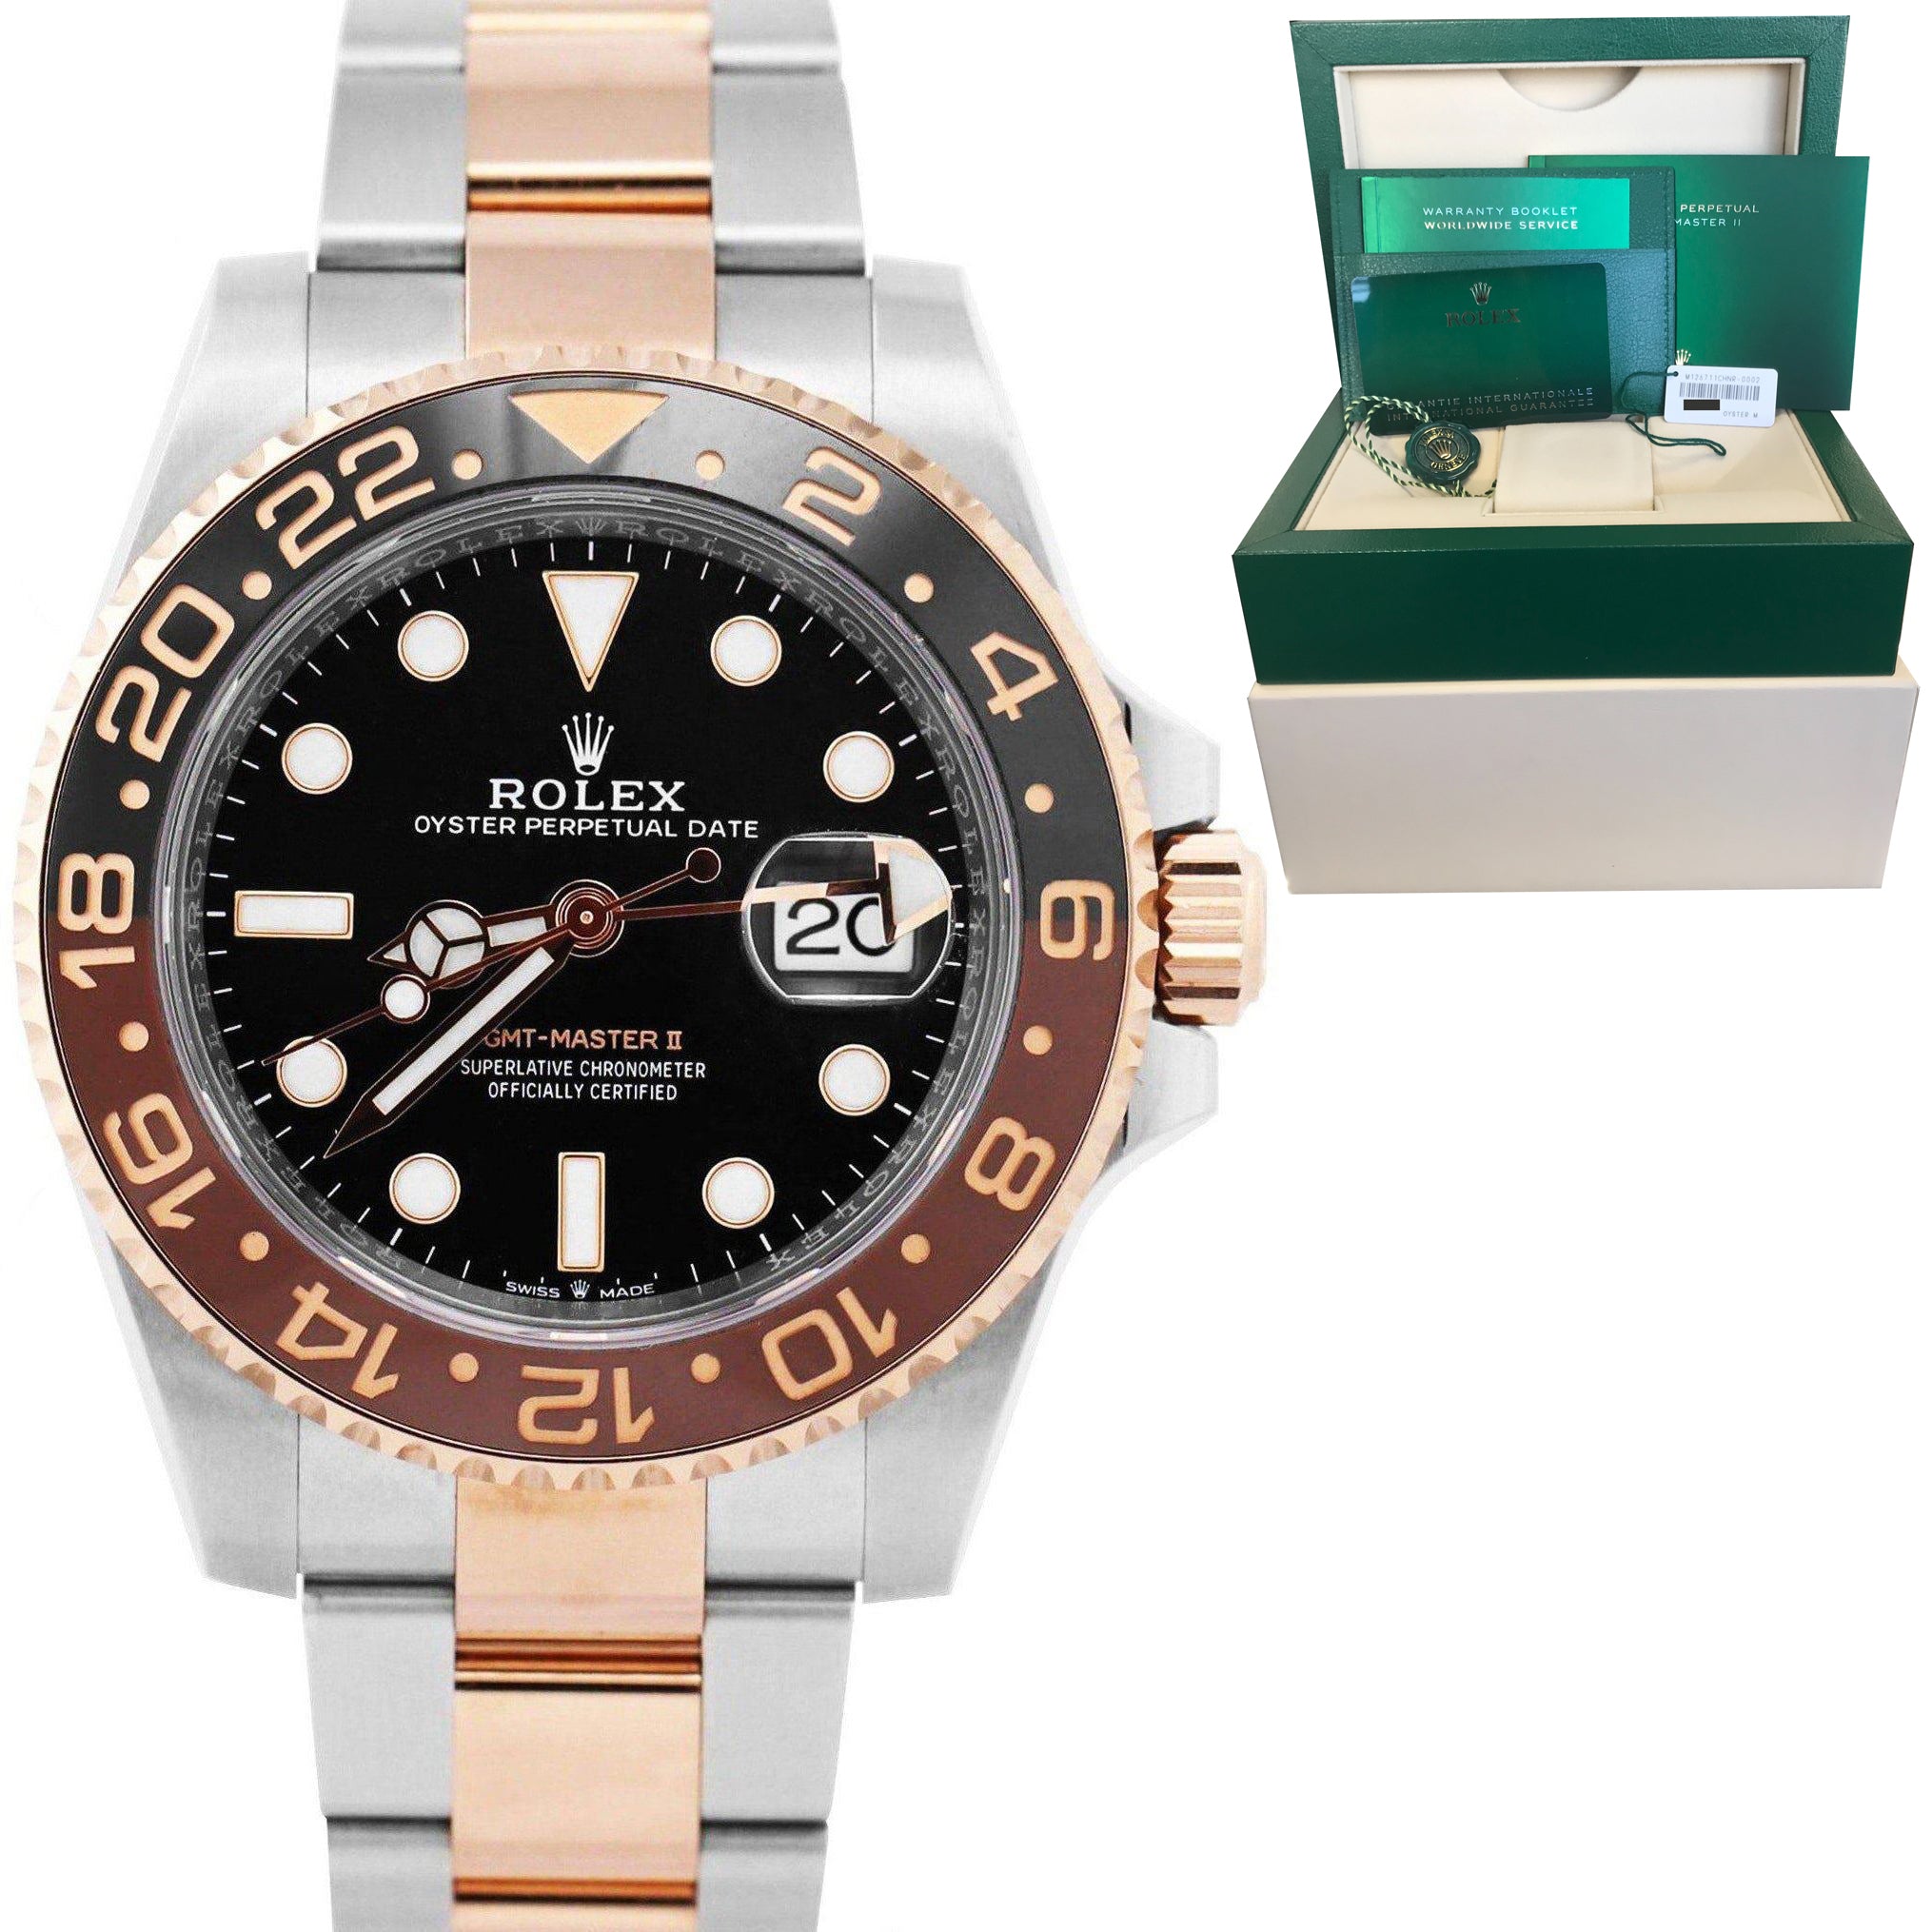 NEW FEB. 2022 Rolex GMT-Master II Root Beer Two-Tone Rose Gold 126711 CHNR Watch